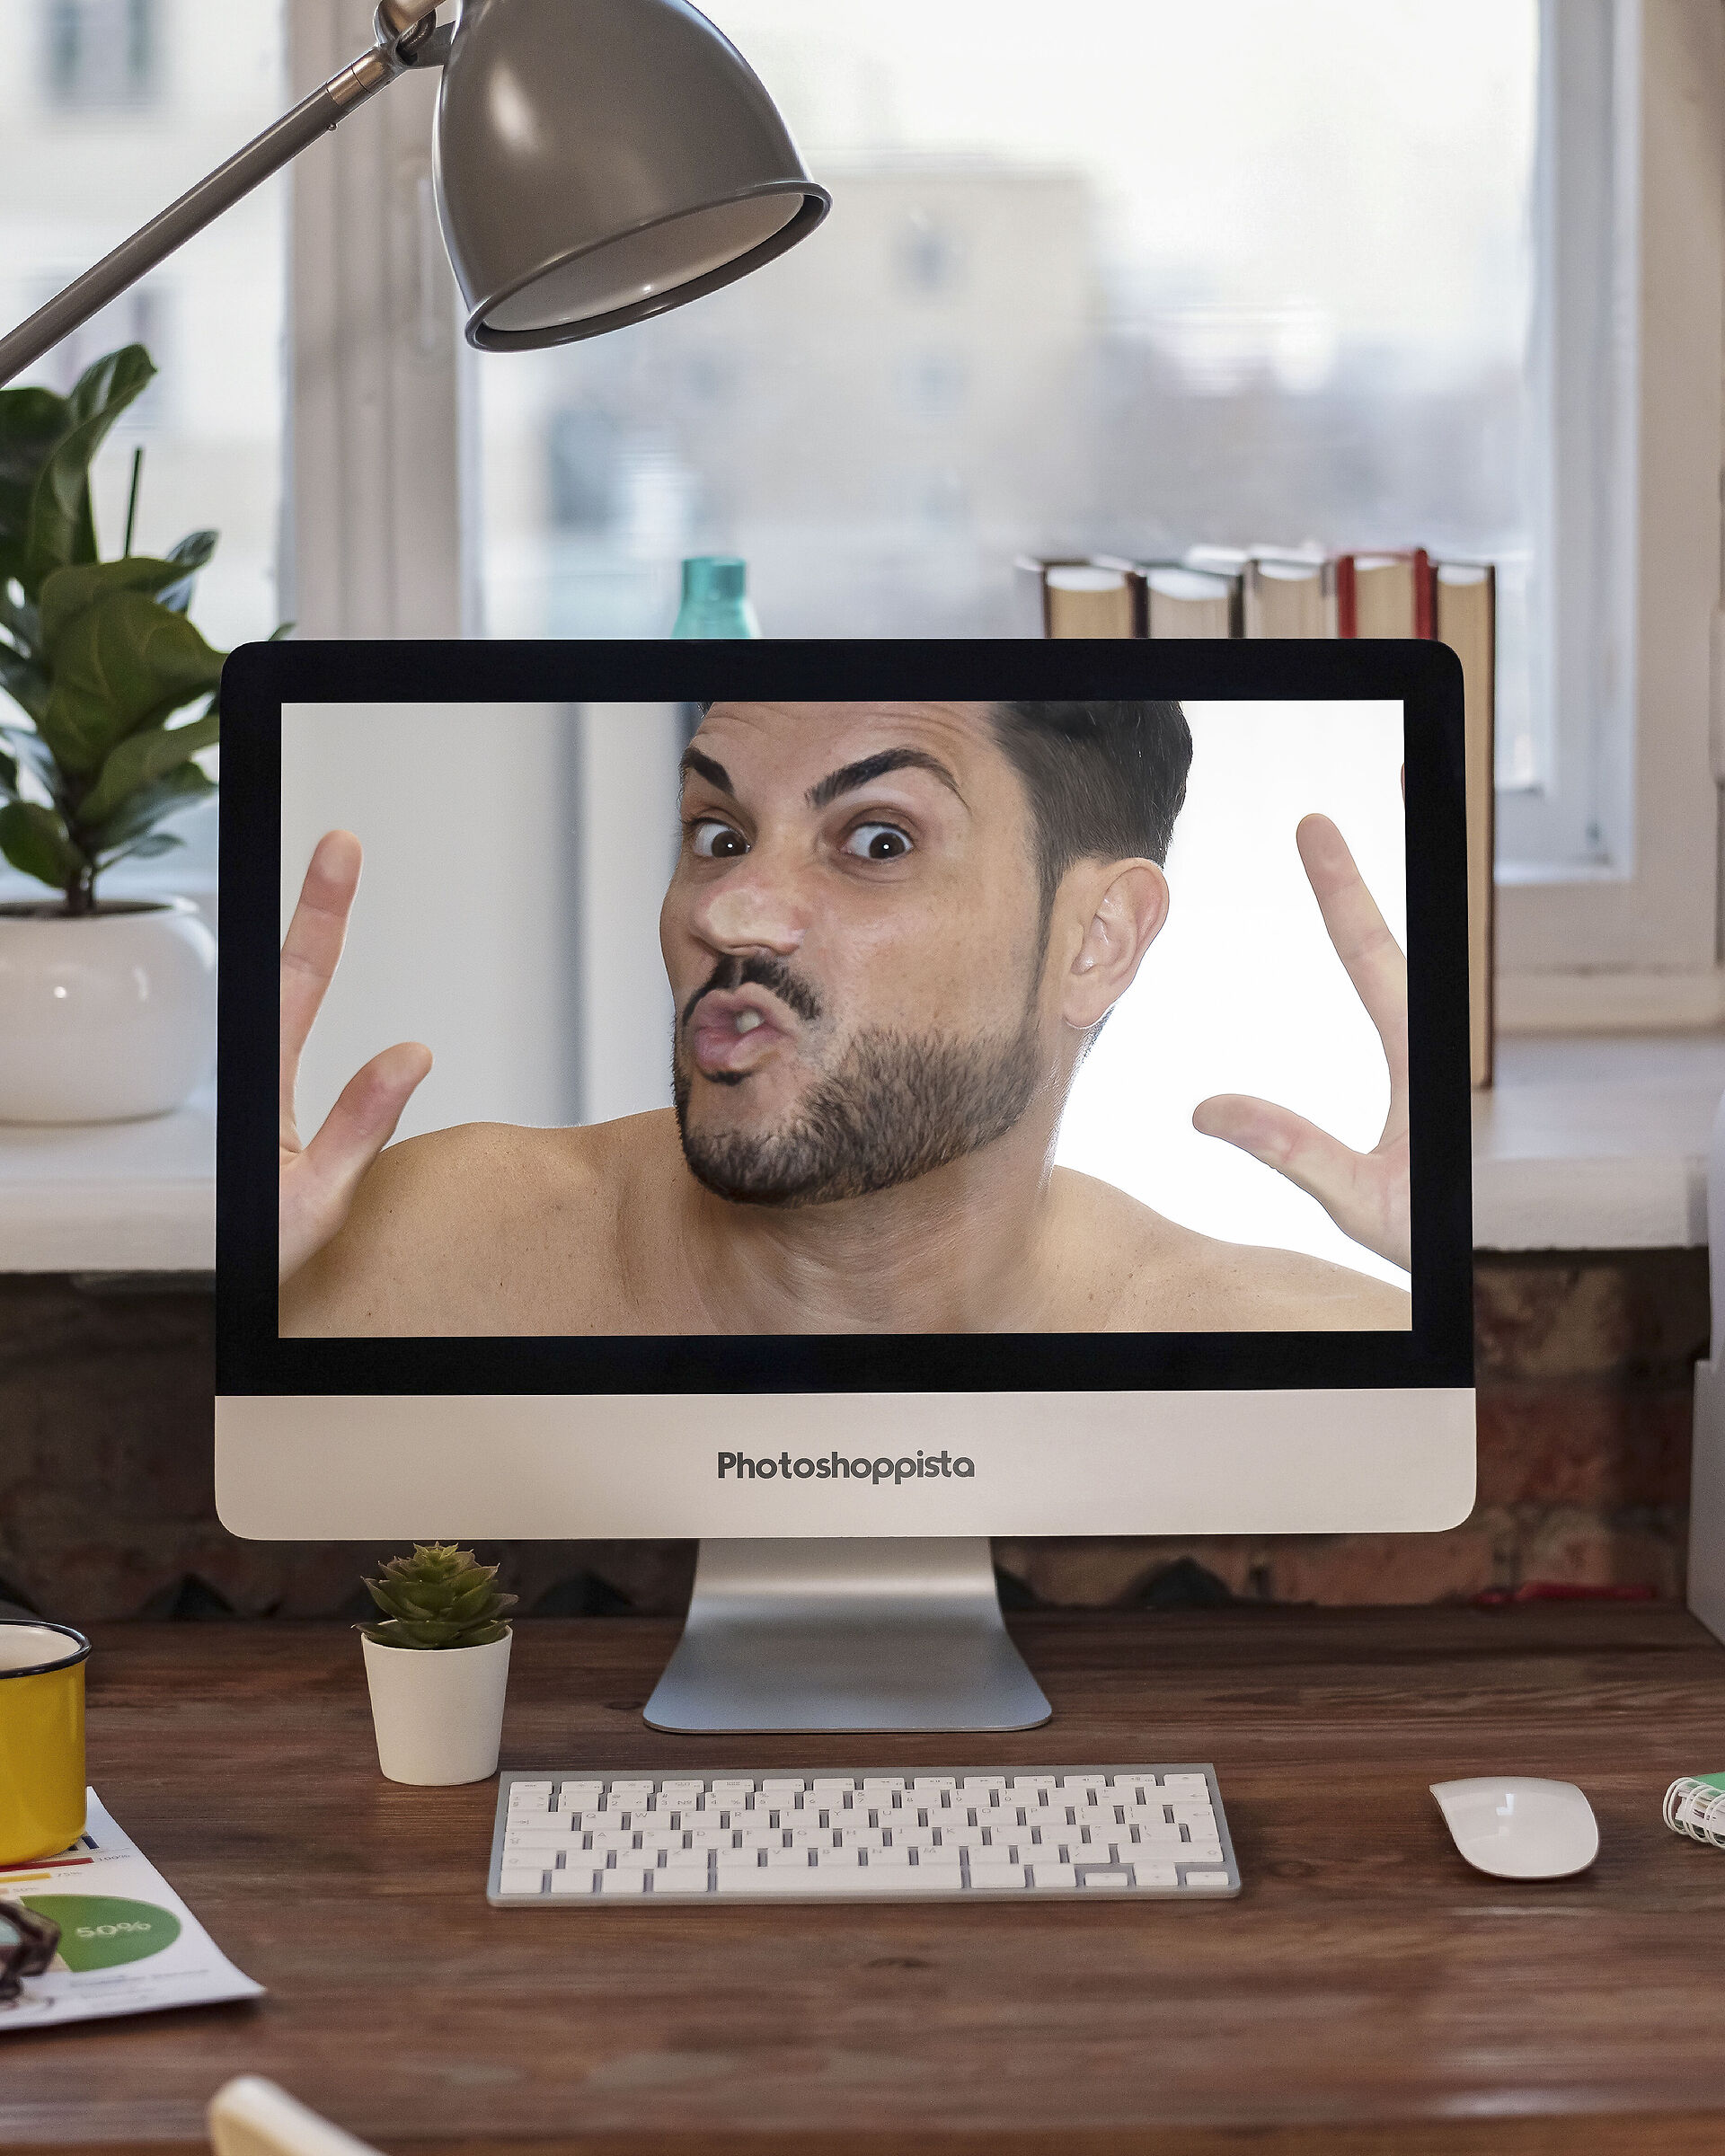 Trapped in the Imac...